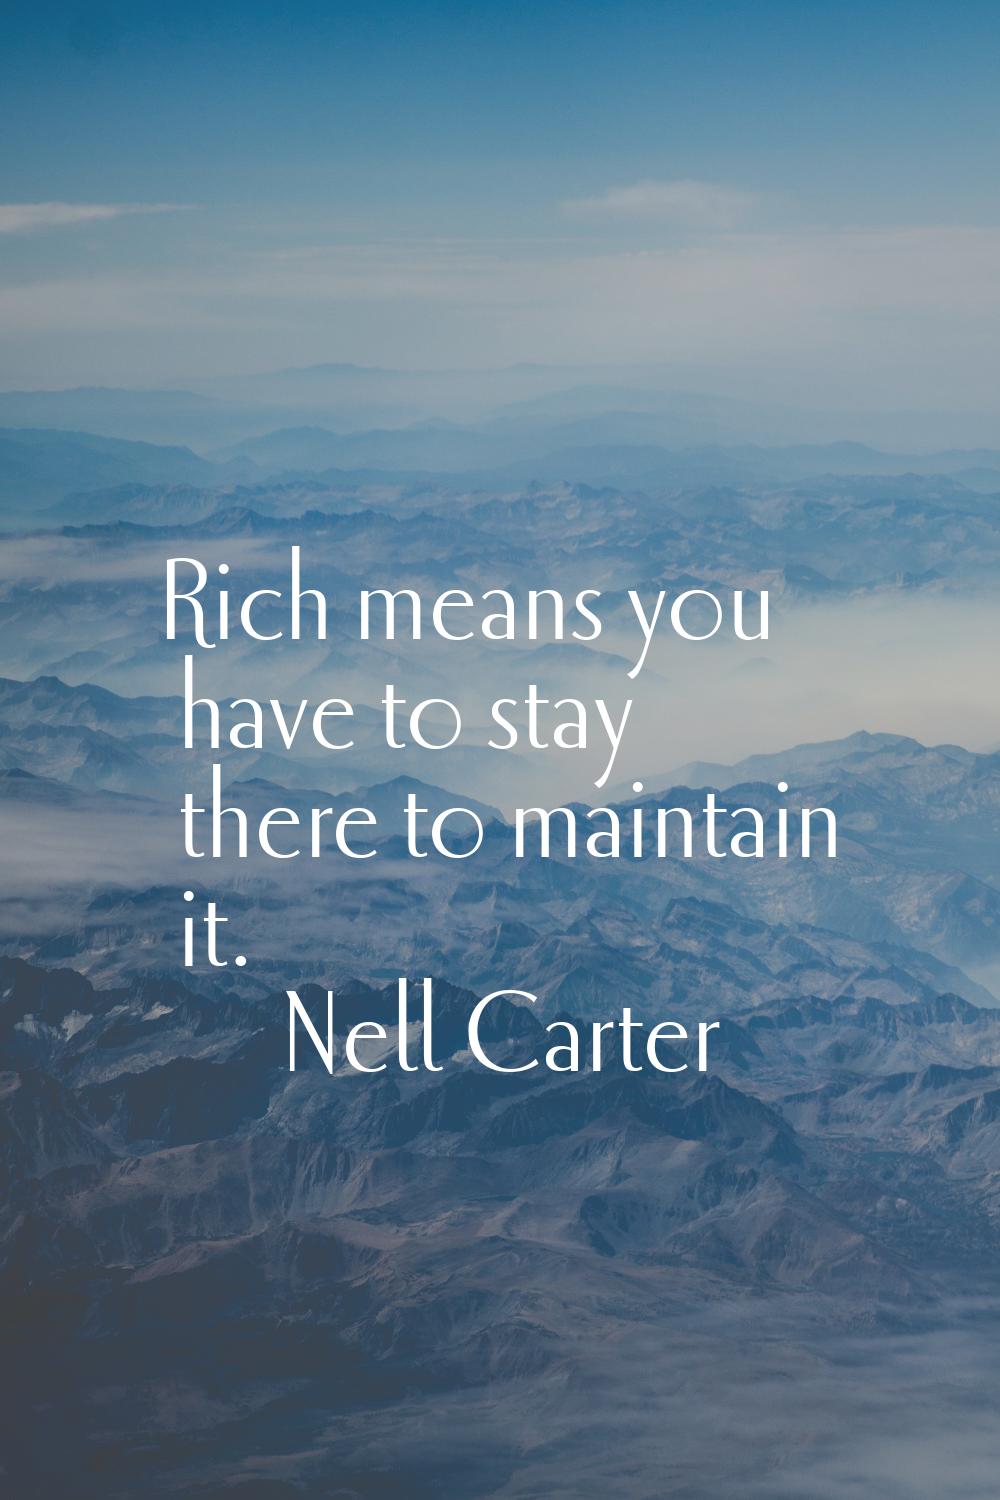 Rich means you have to stay there to maintain it.